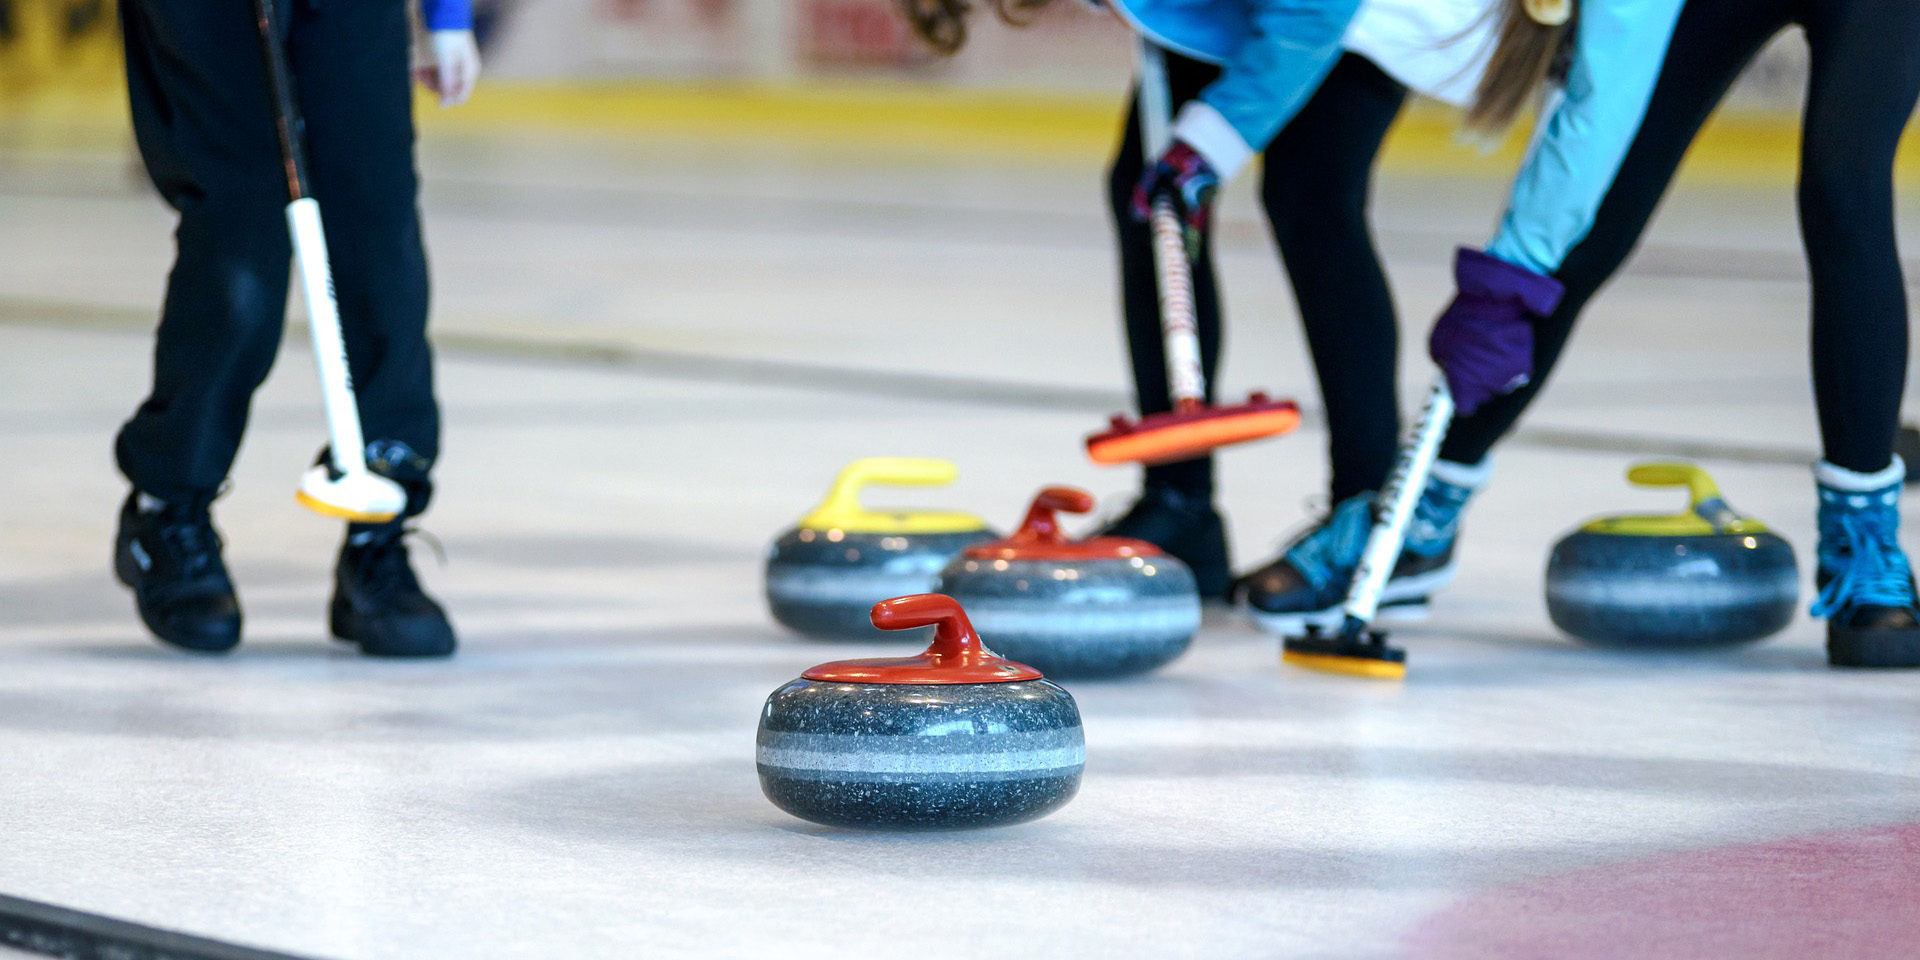 Curlers on curling rink